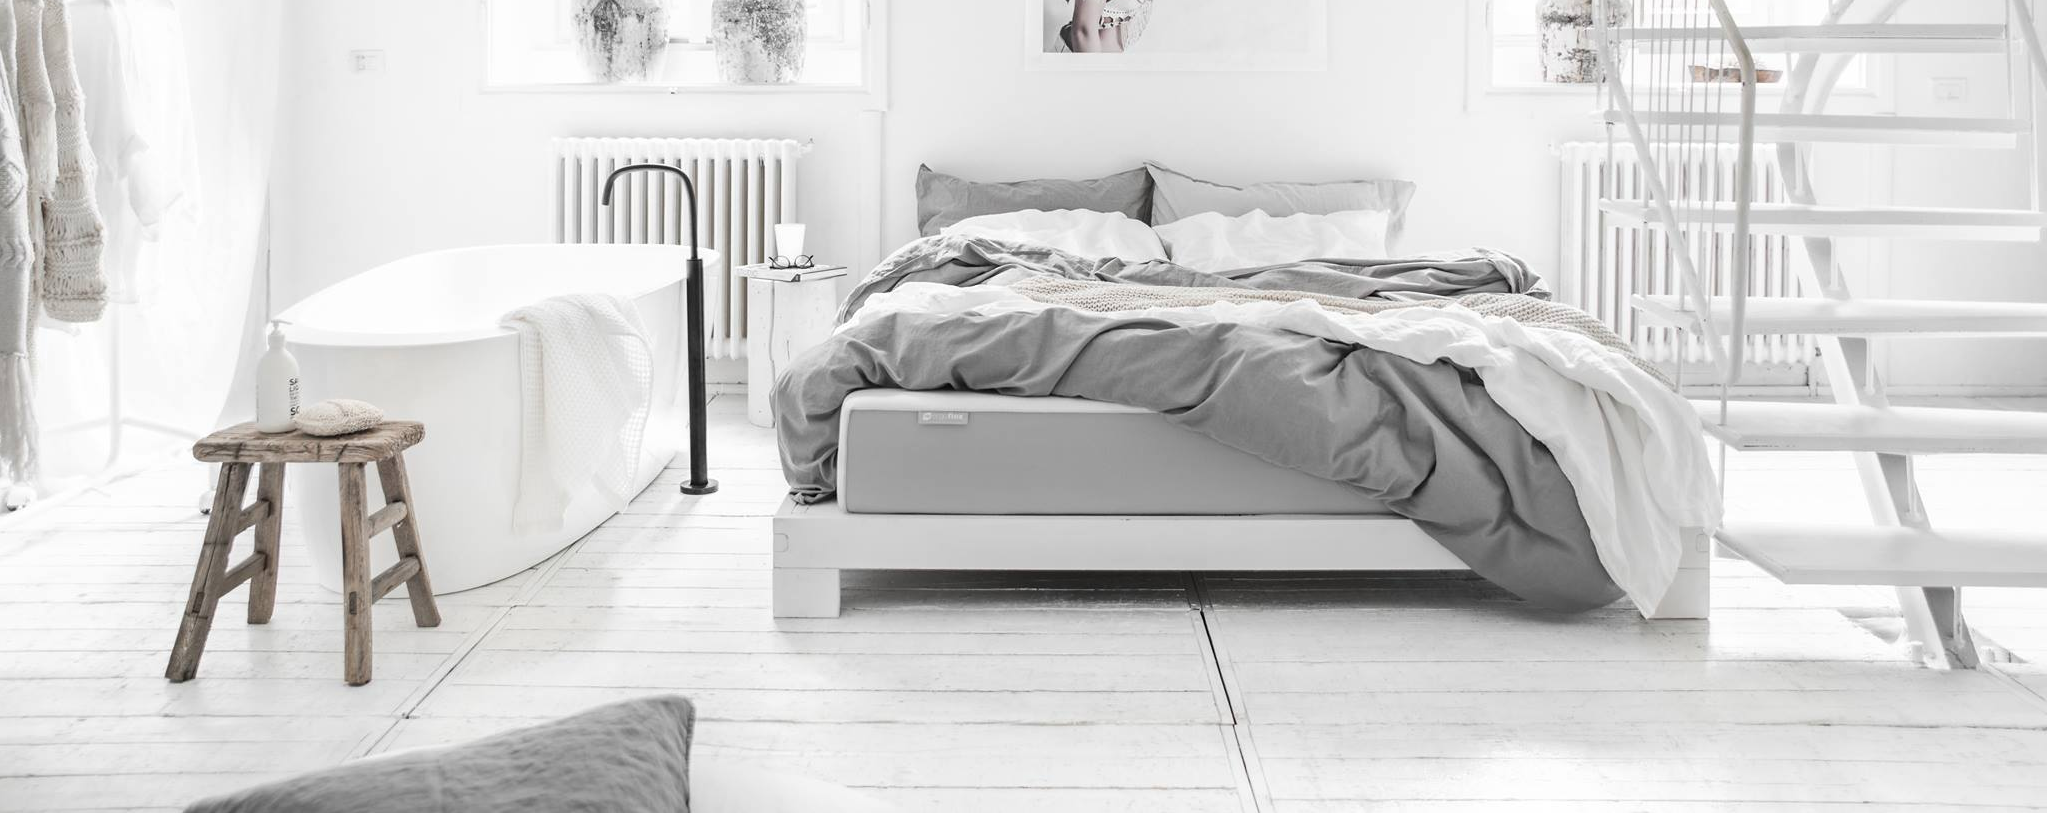 Save extra 35% OFF on All Mattresses, Bed Frames, Pillows, Sheets and Protectors